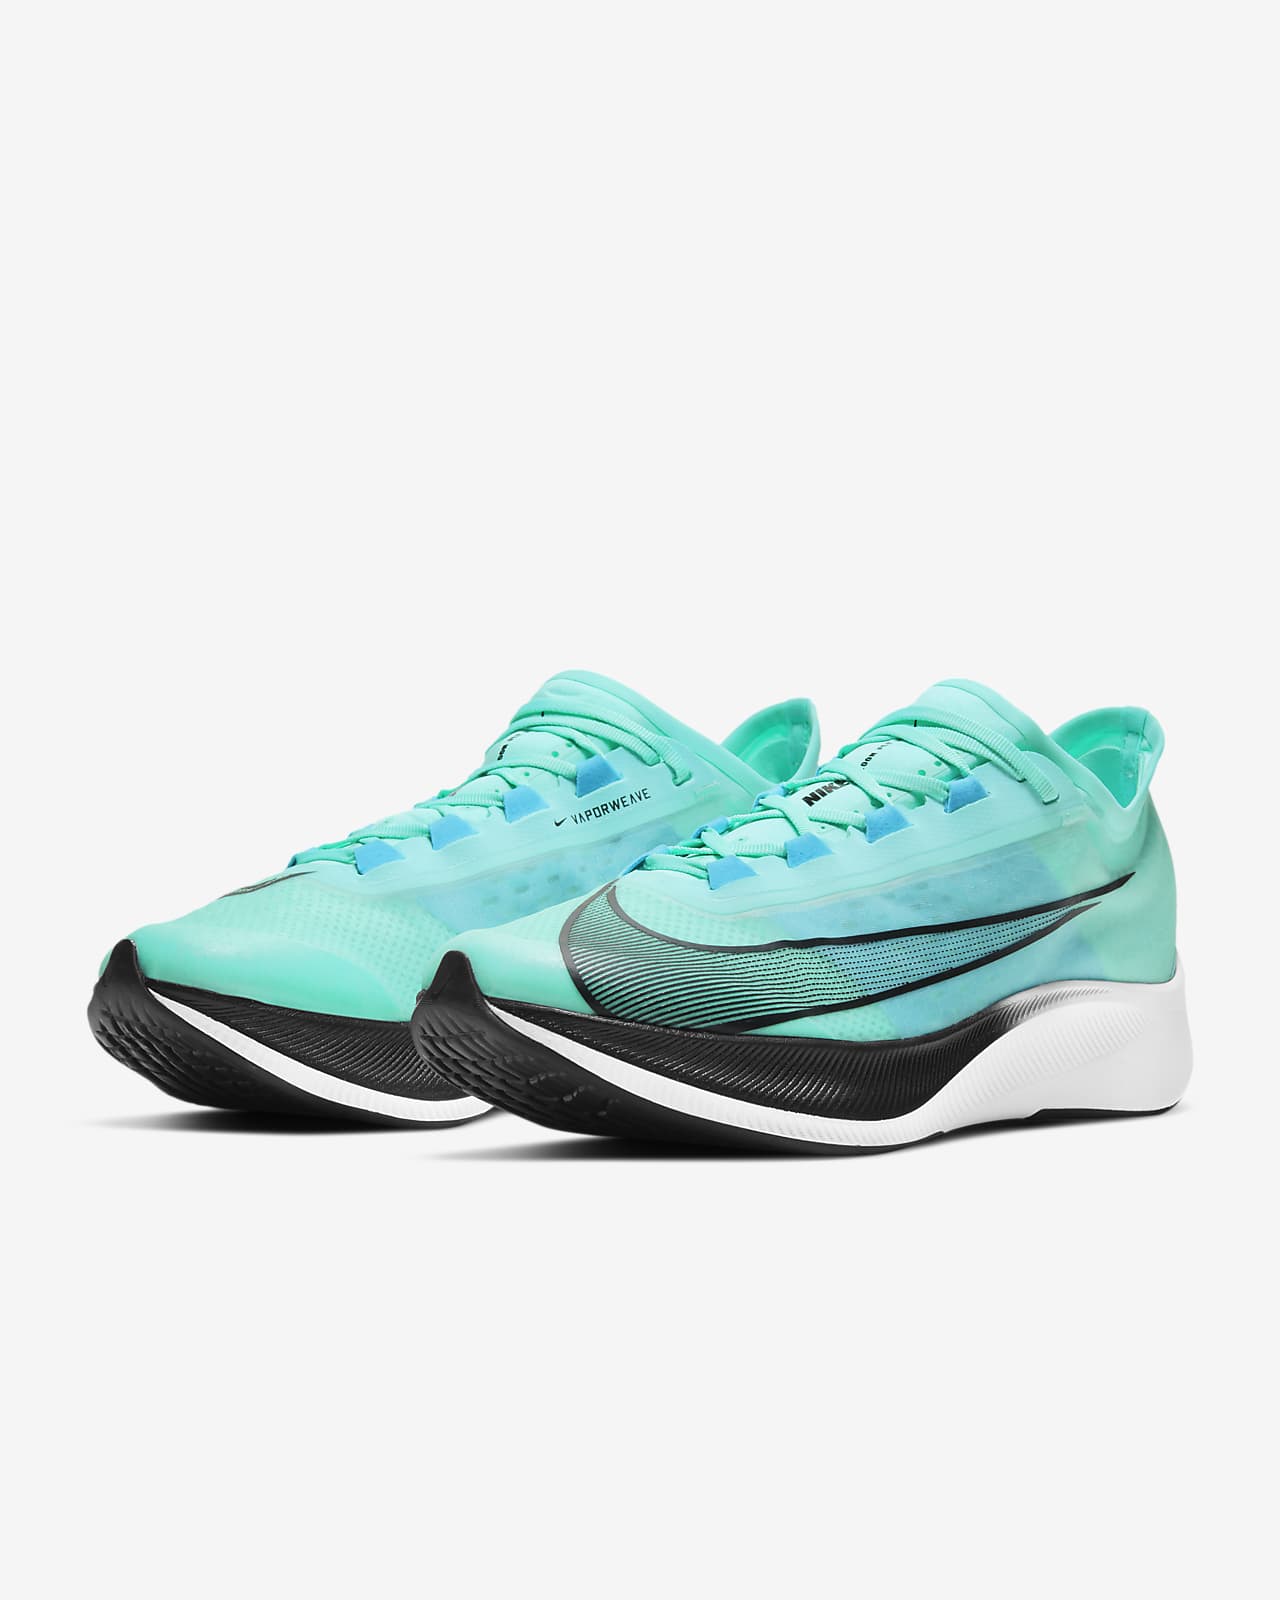 nike zoom fly 3 size 8.5